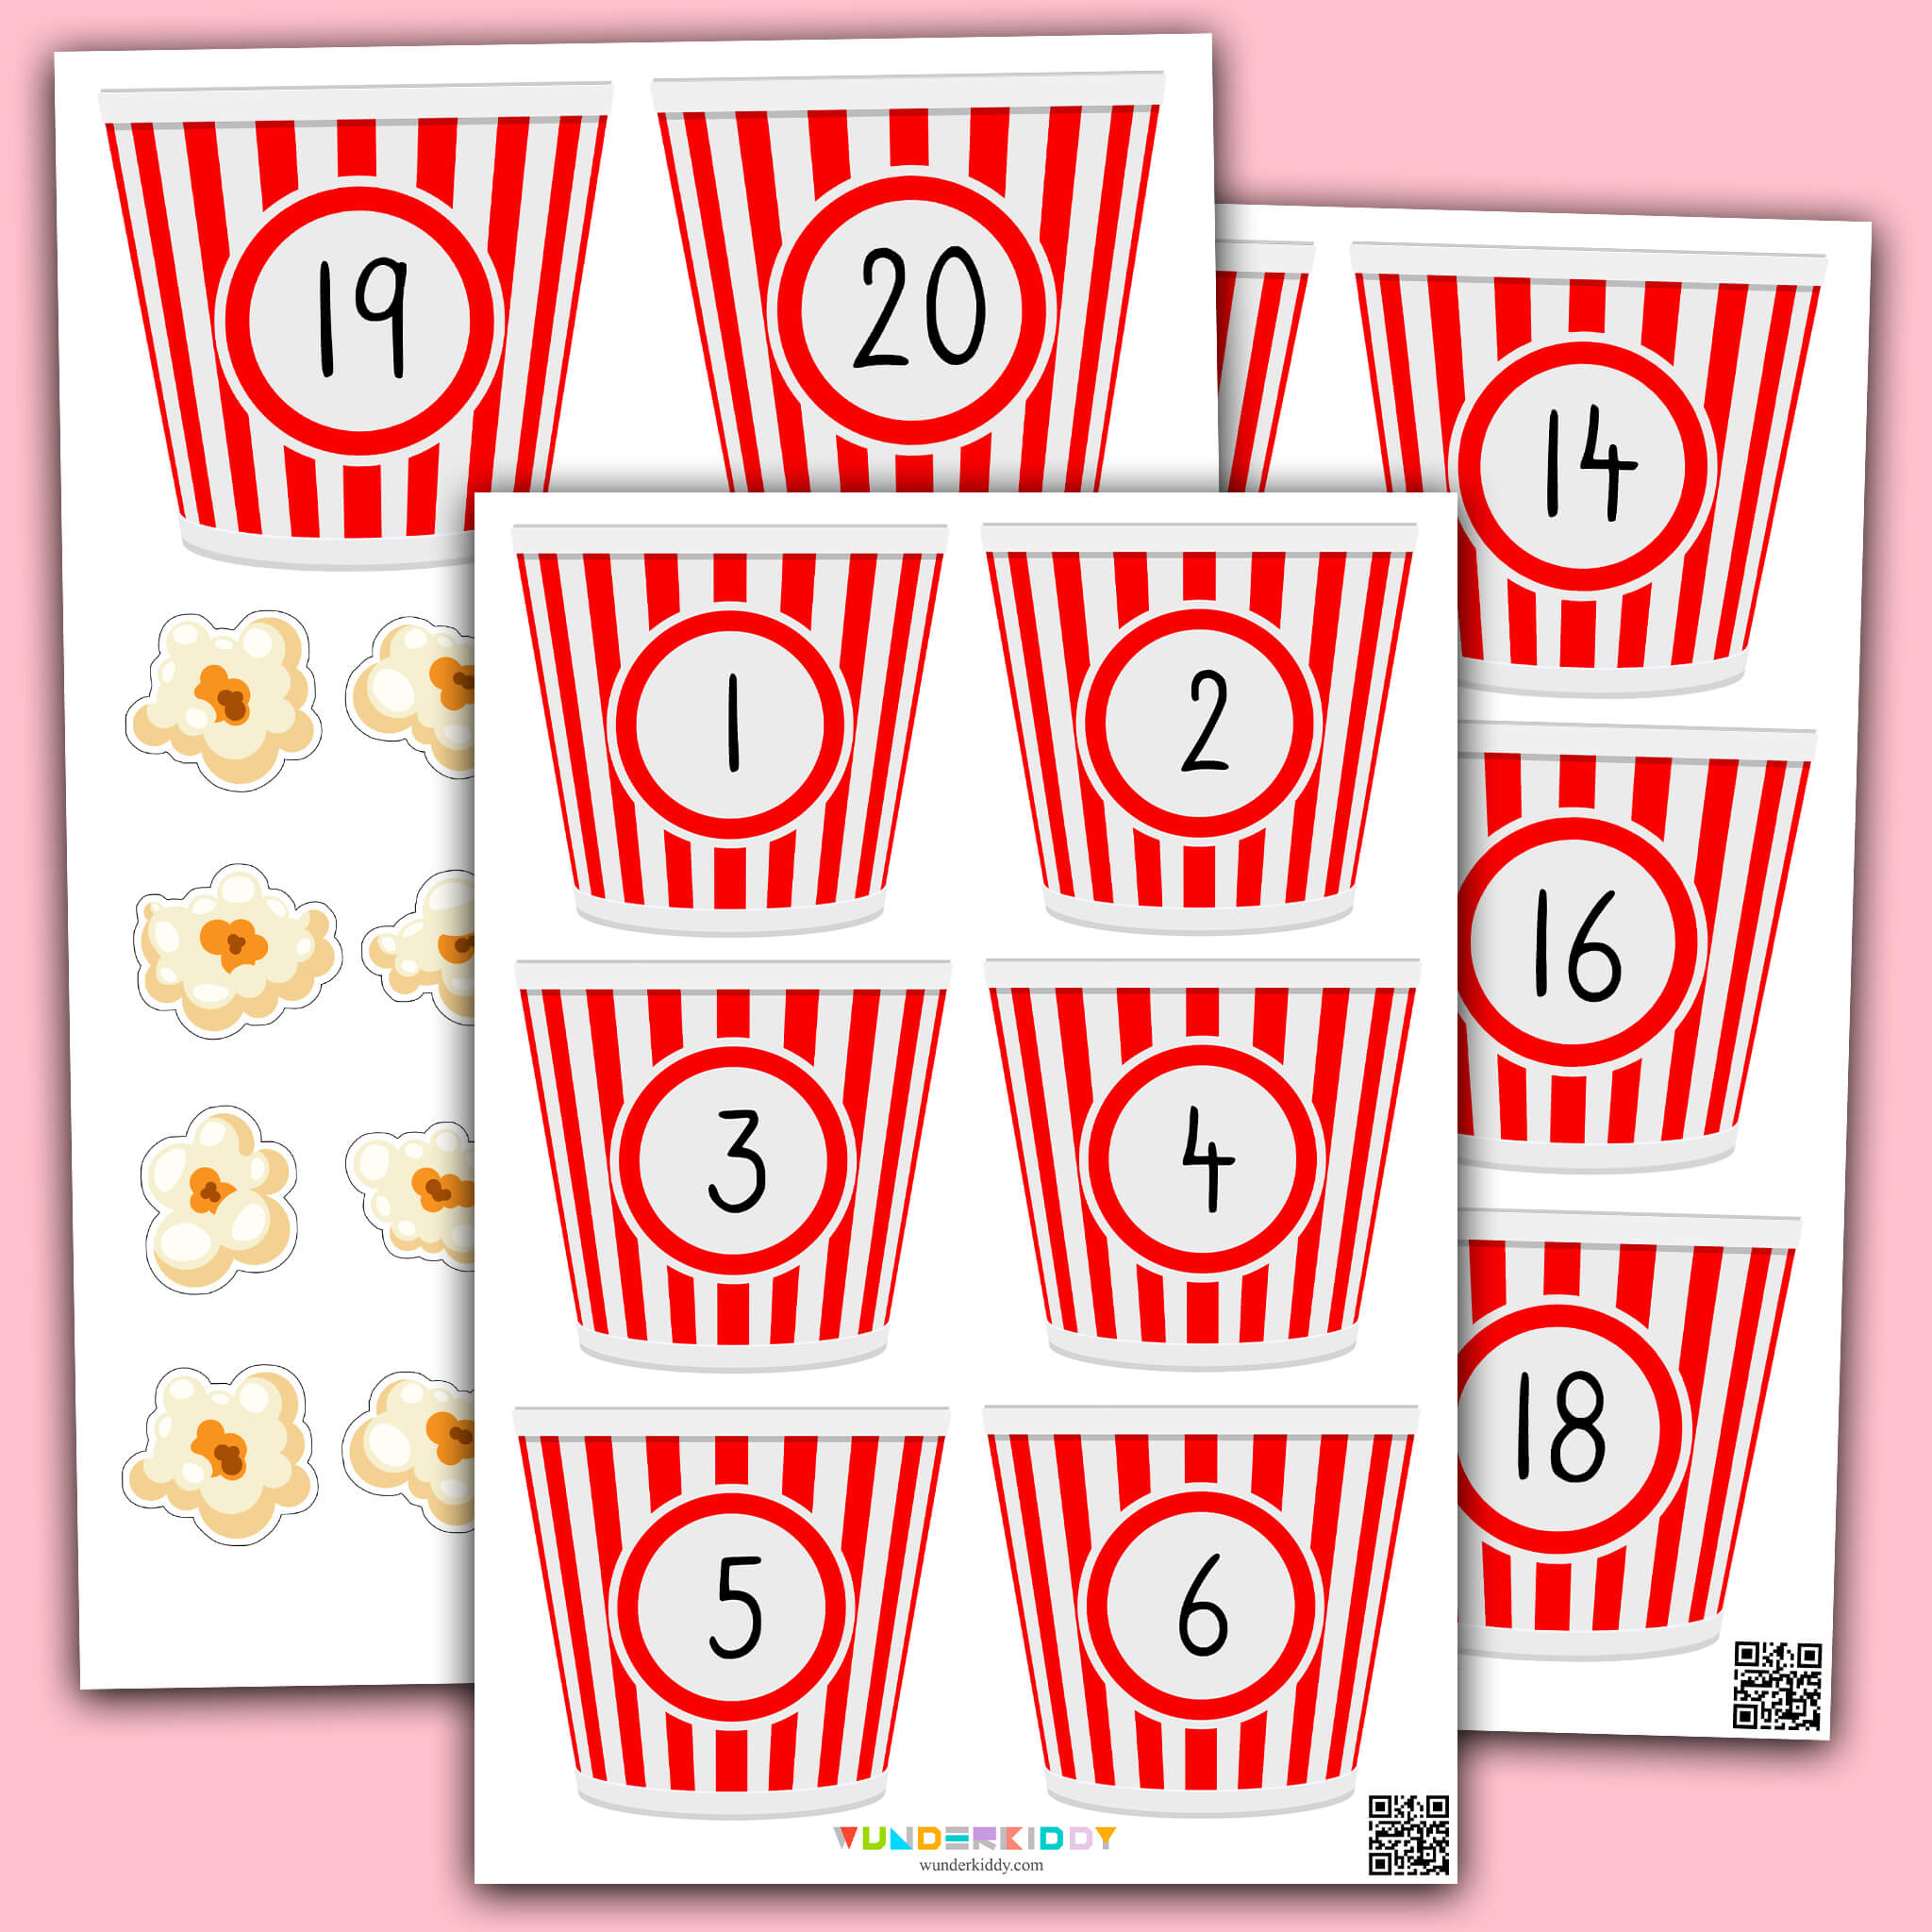 Popcorn Counting Cards